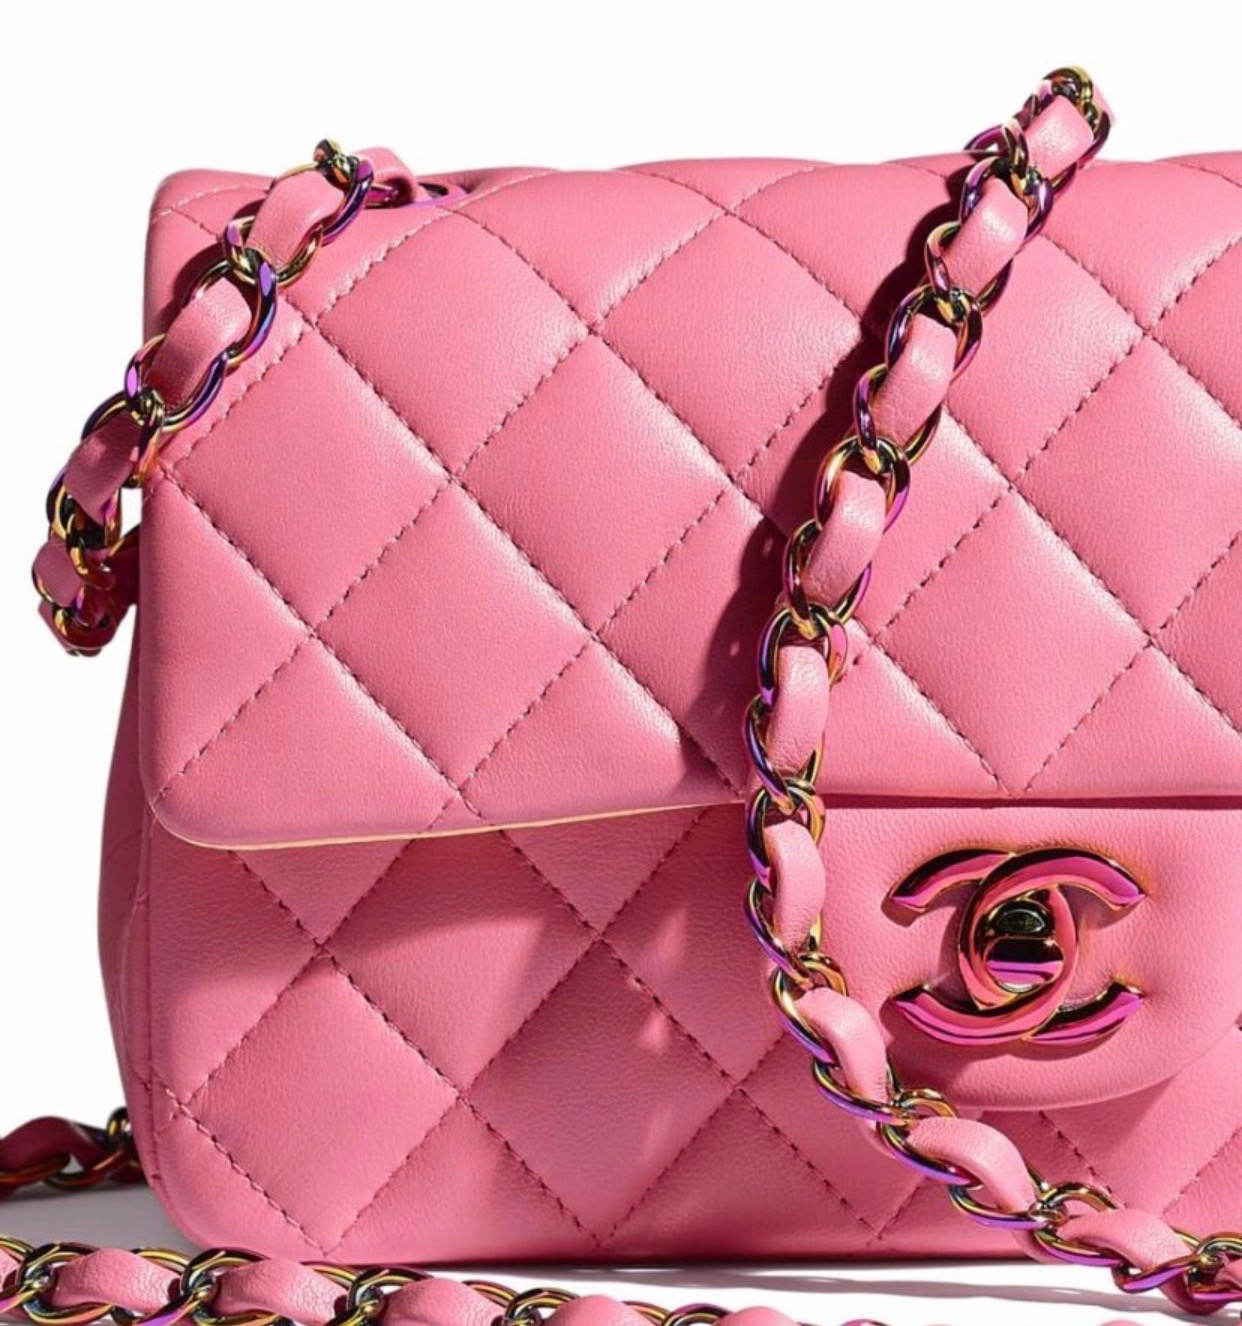 Chanel's Classic Flap Gets a New Official Name: The 11.12 - The Vault